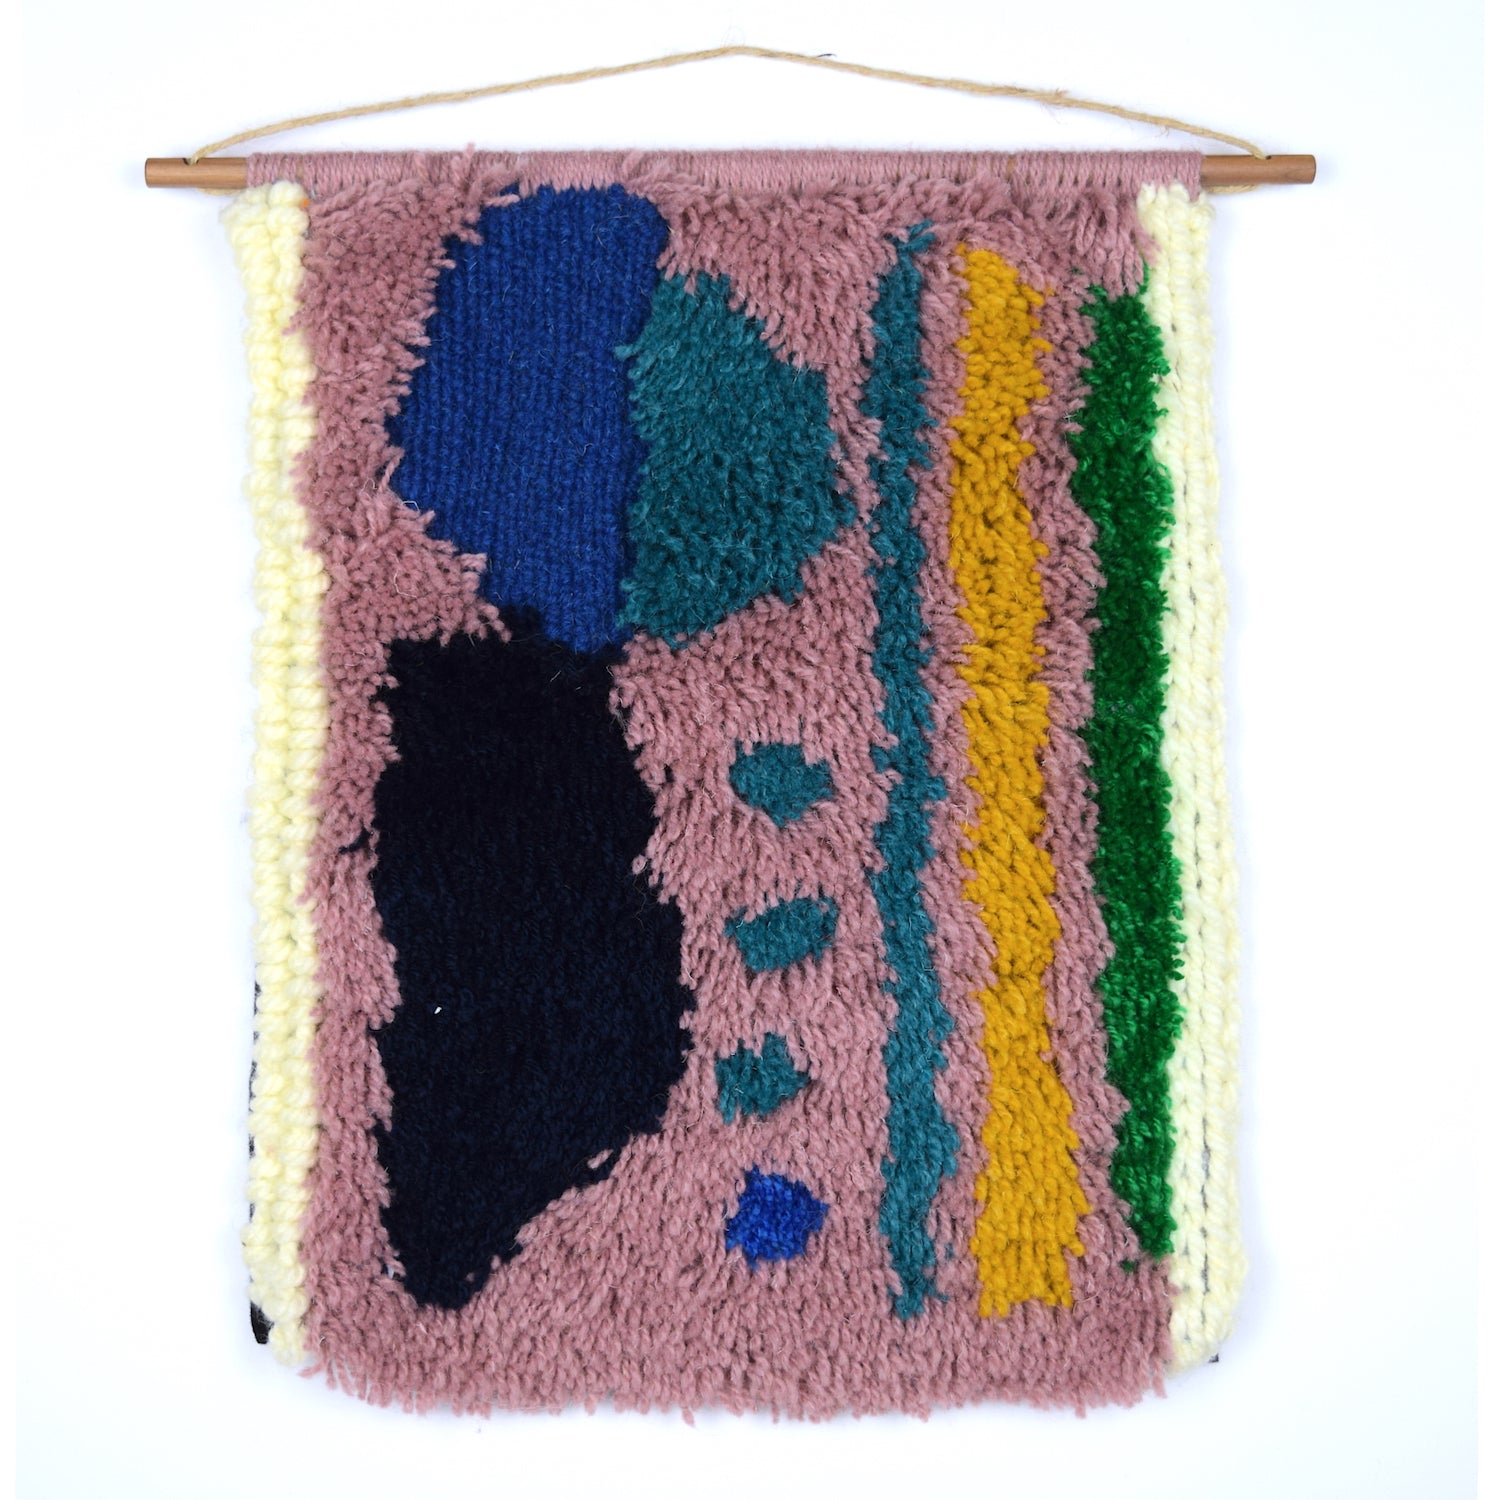 A contemporary hand latch hooked wall hanging, using a mixture of textures, latch hook, locker hook and punch needle with simple shapes and colour (lilac, aubergine, cream, blue, turquoise, mustard and green), showcasing Reclaimed Yarn and Yarn from previous projects.